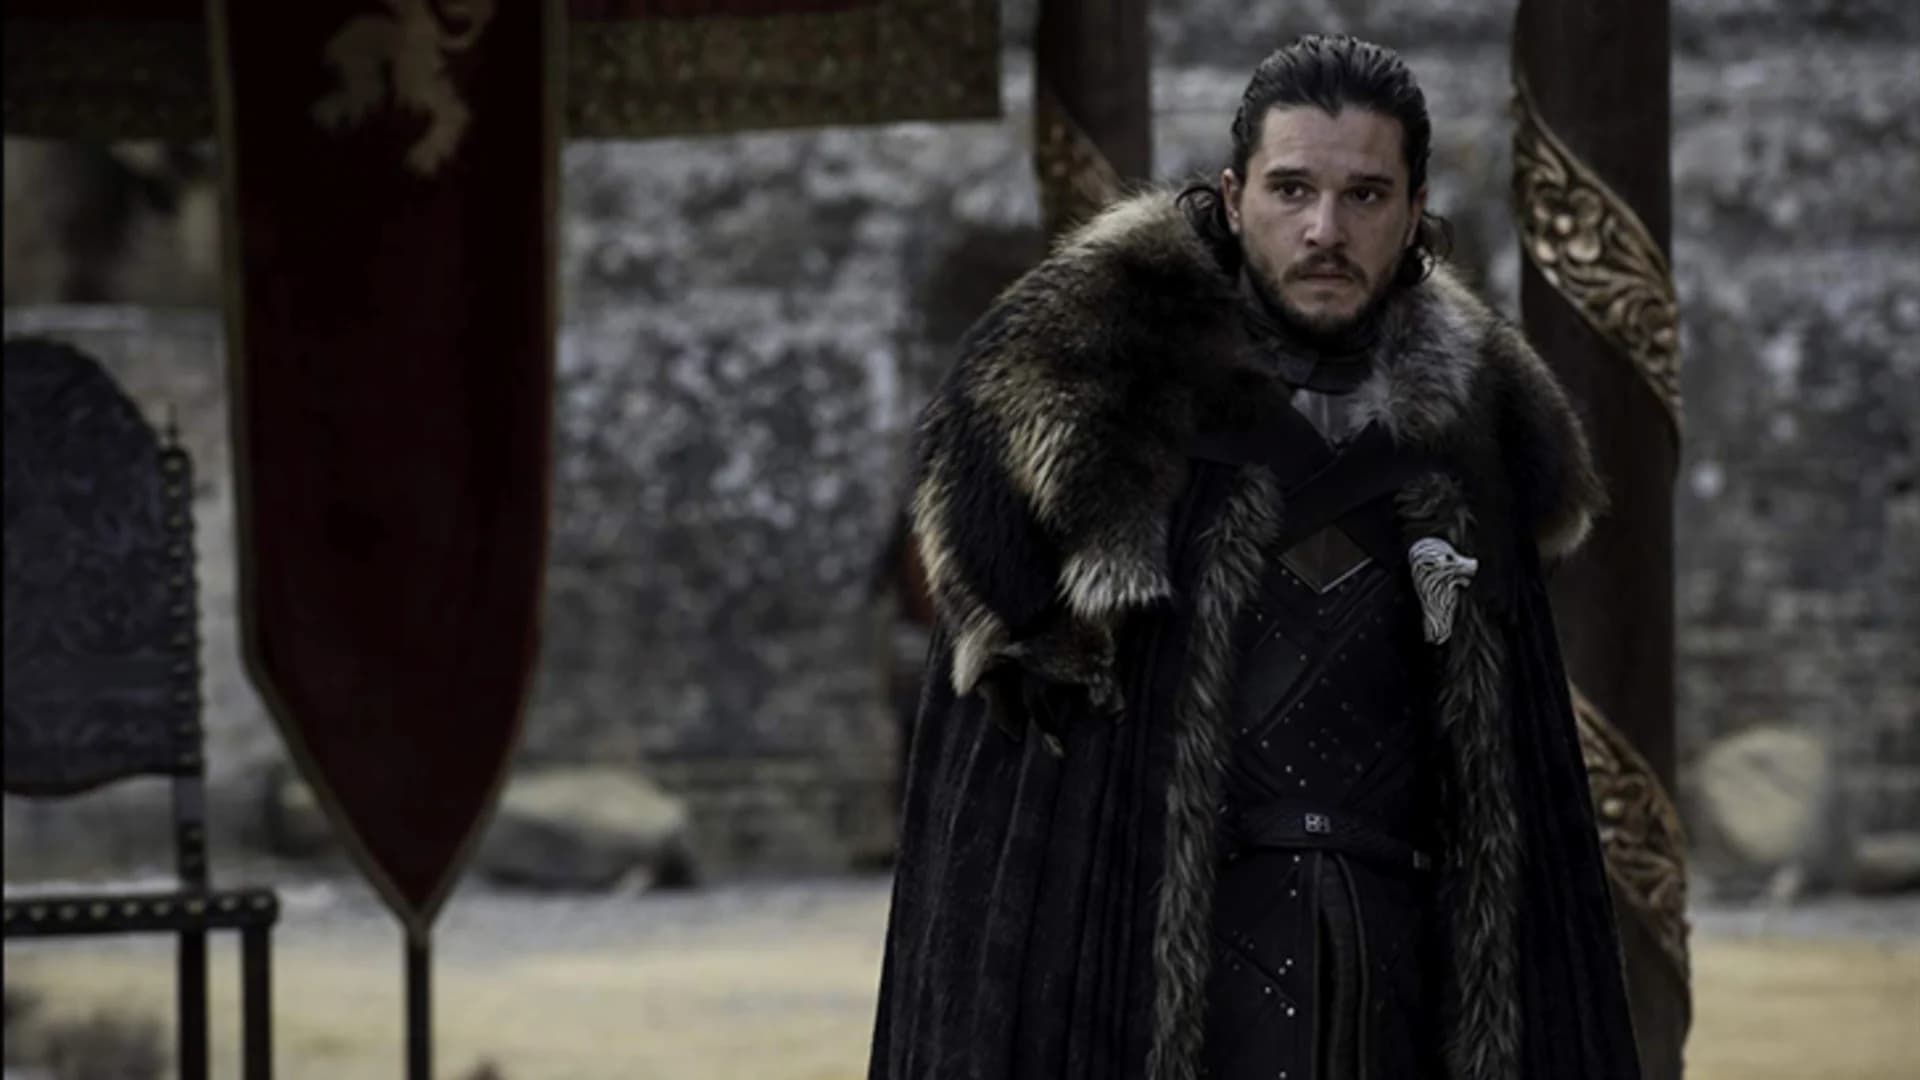 And the winner of the 'Game of Thrones' is ...